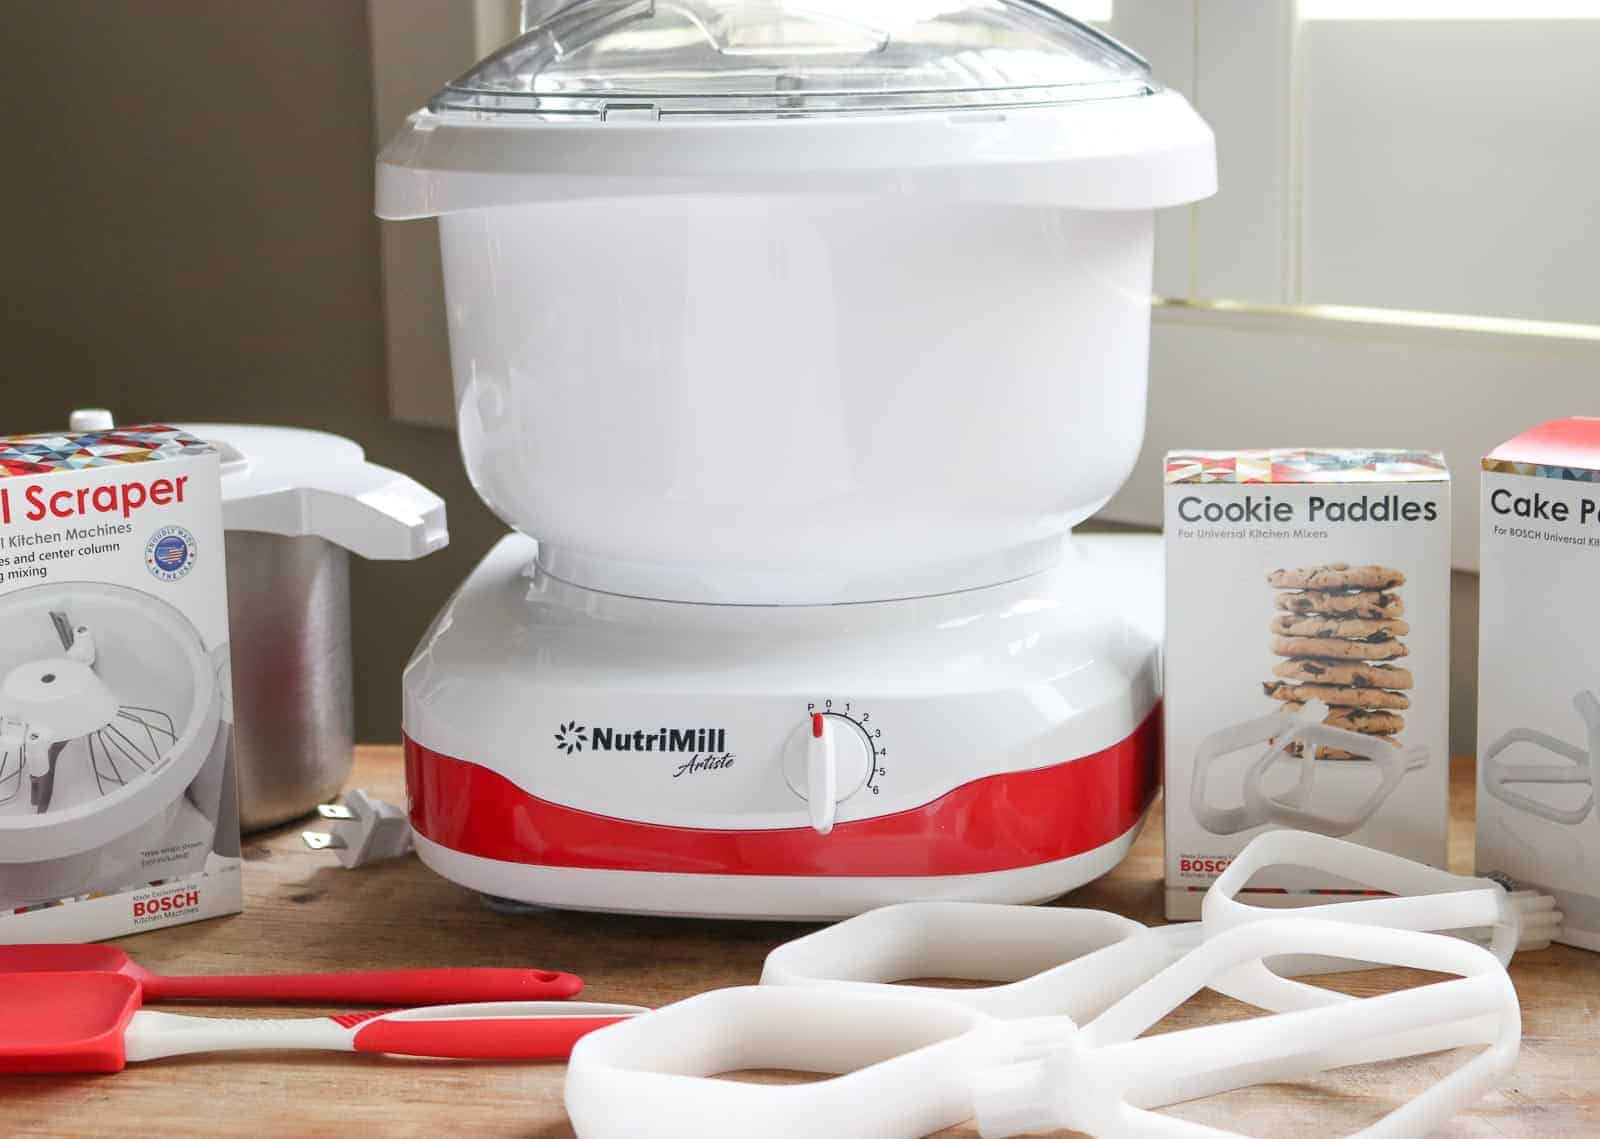 Need a great mixer? Check out my new Nutrimill Artiste Mixer! - Gourmet  Done Skinny